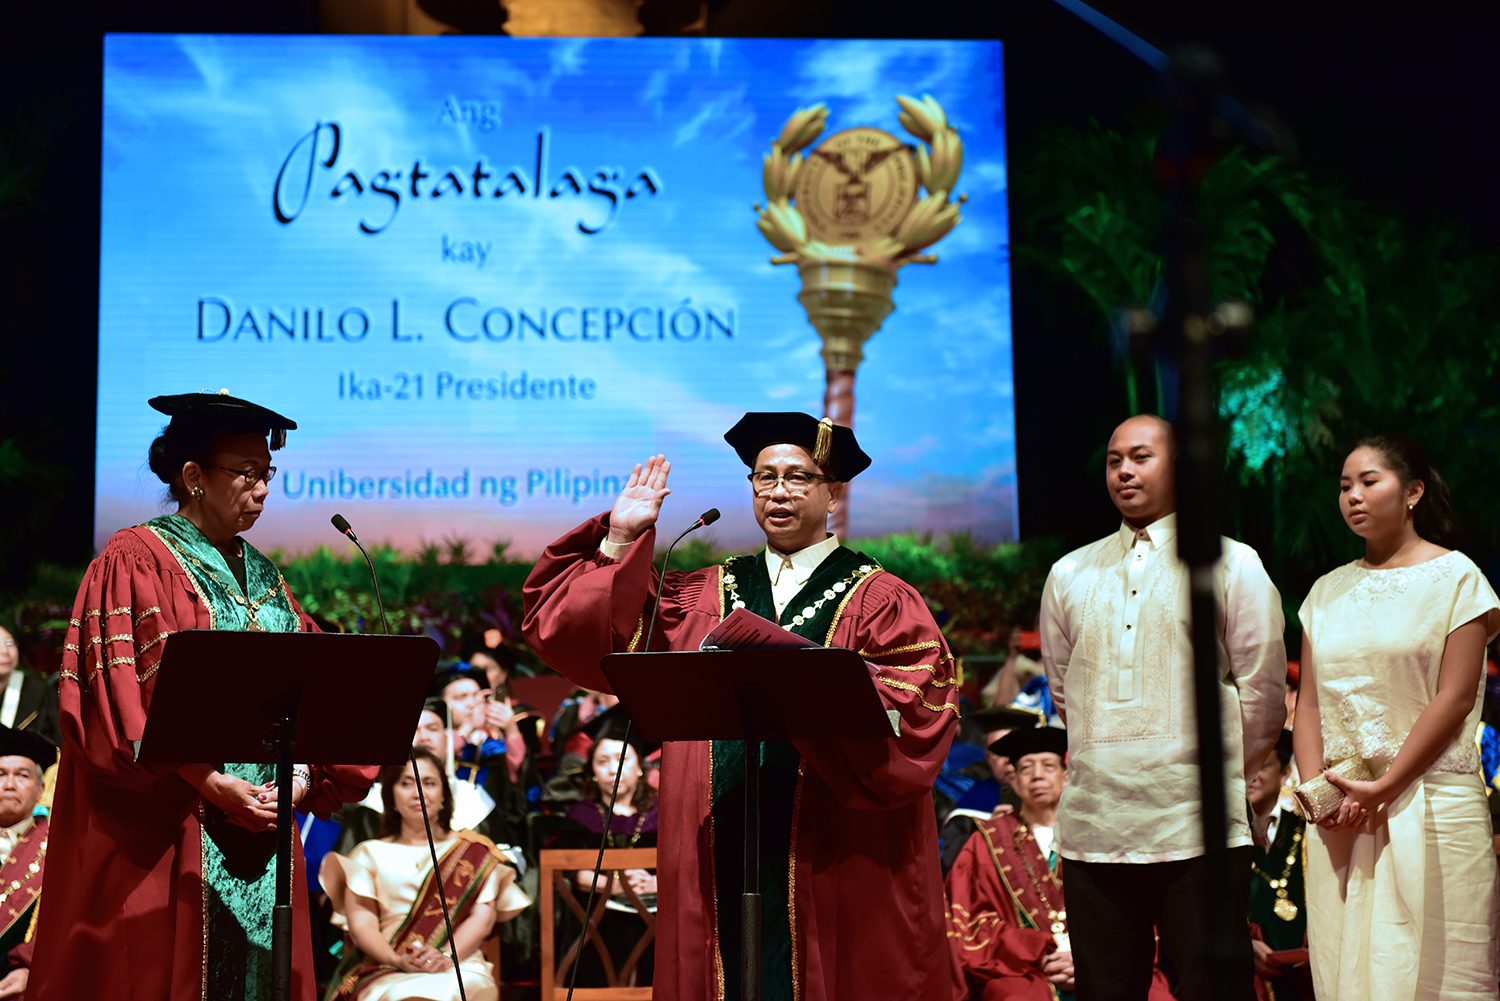 Danilo Concepcion vows UP students can express ideas ‘without fear’